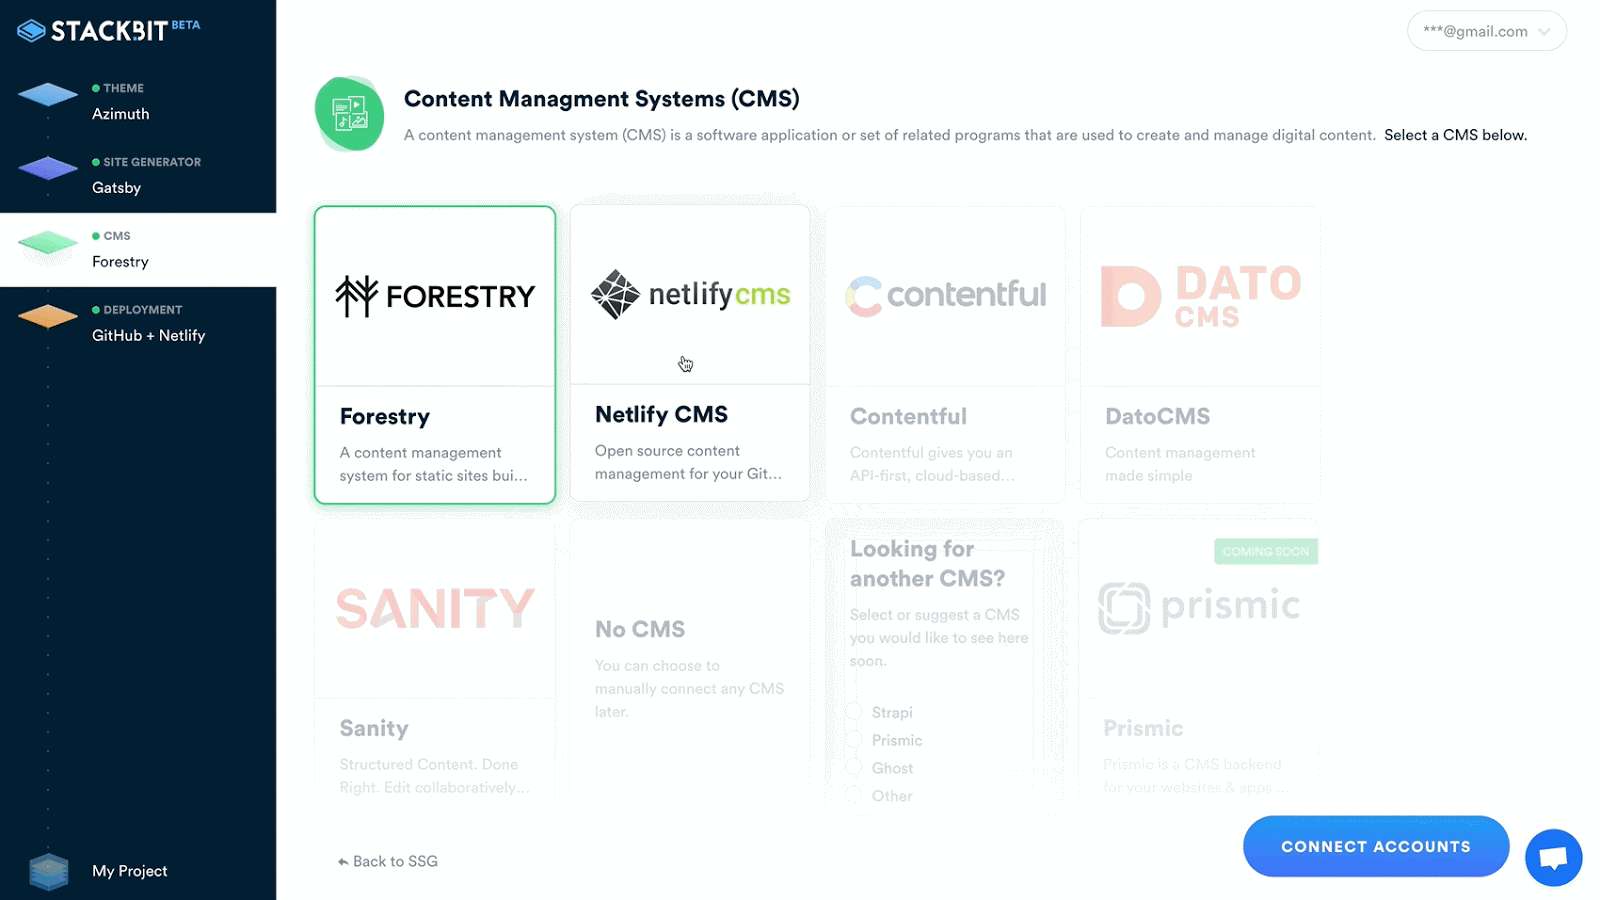 image showing selection screen for content management systems in Stackbit